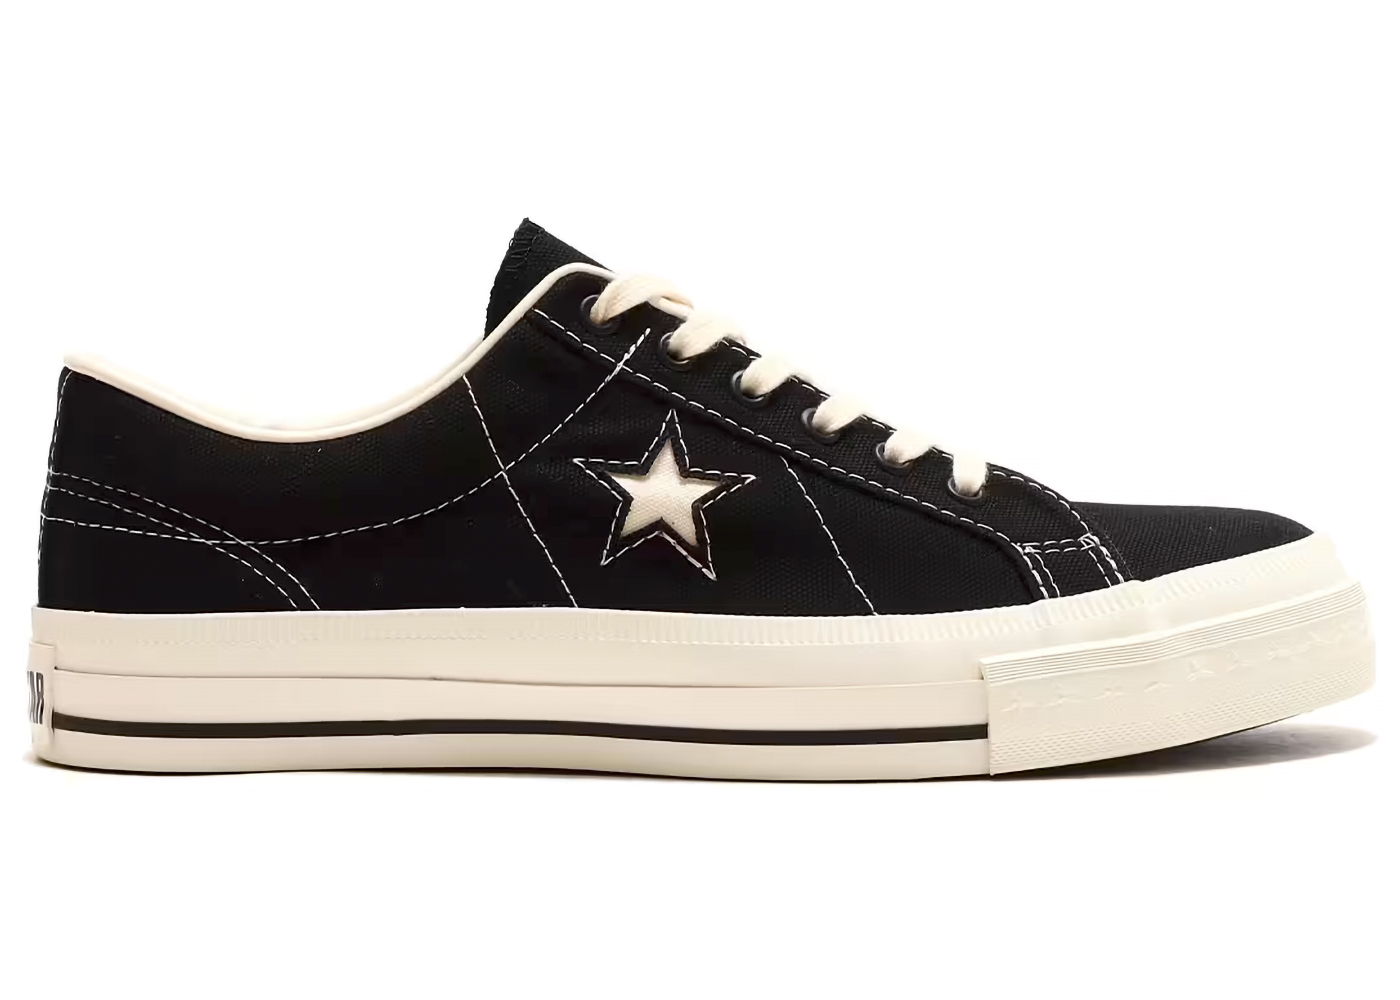 Converse One Star Made in Japan Vintage Canvas Black メンズ ...